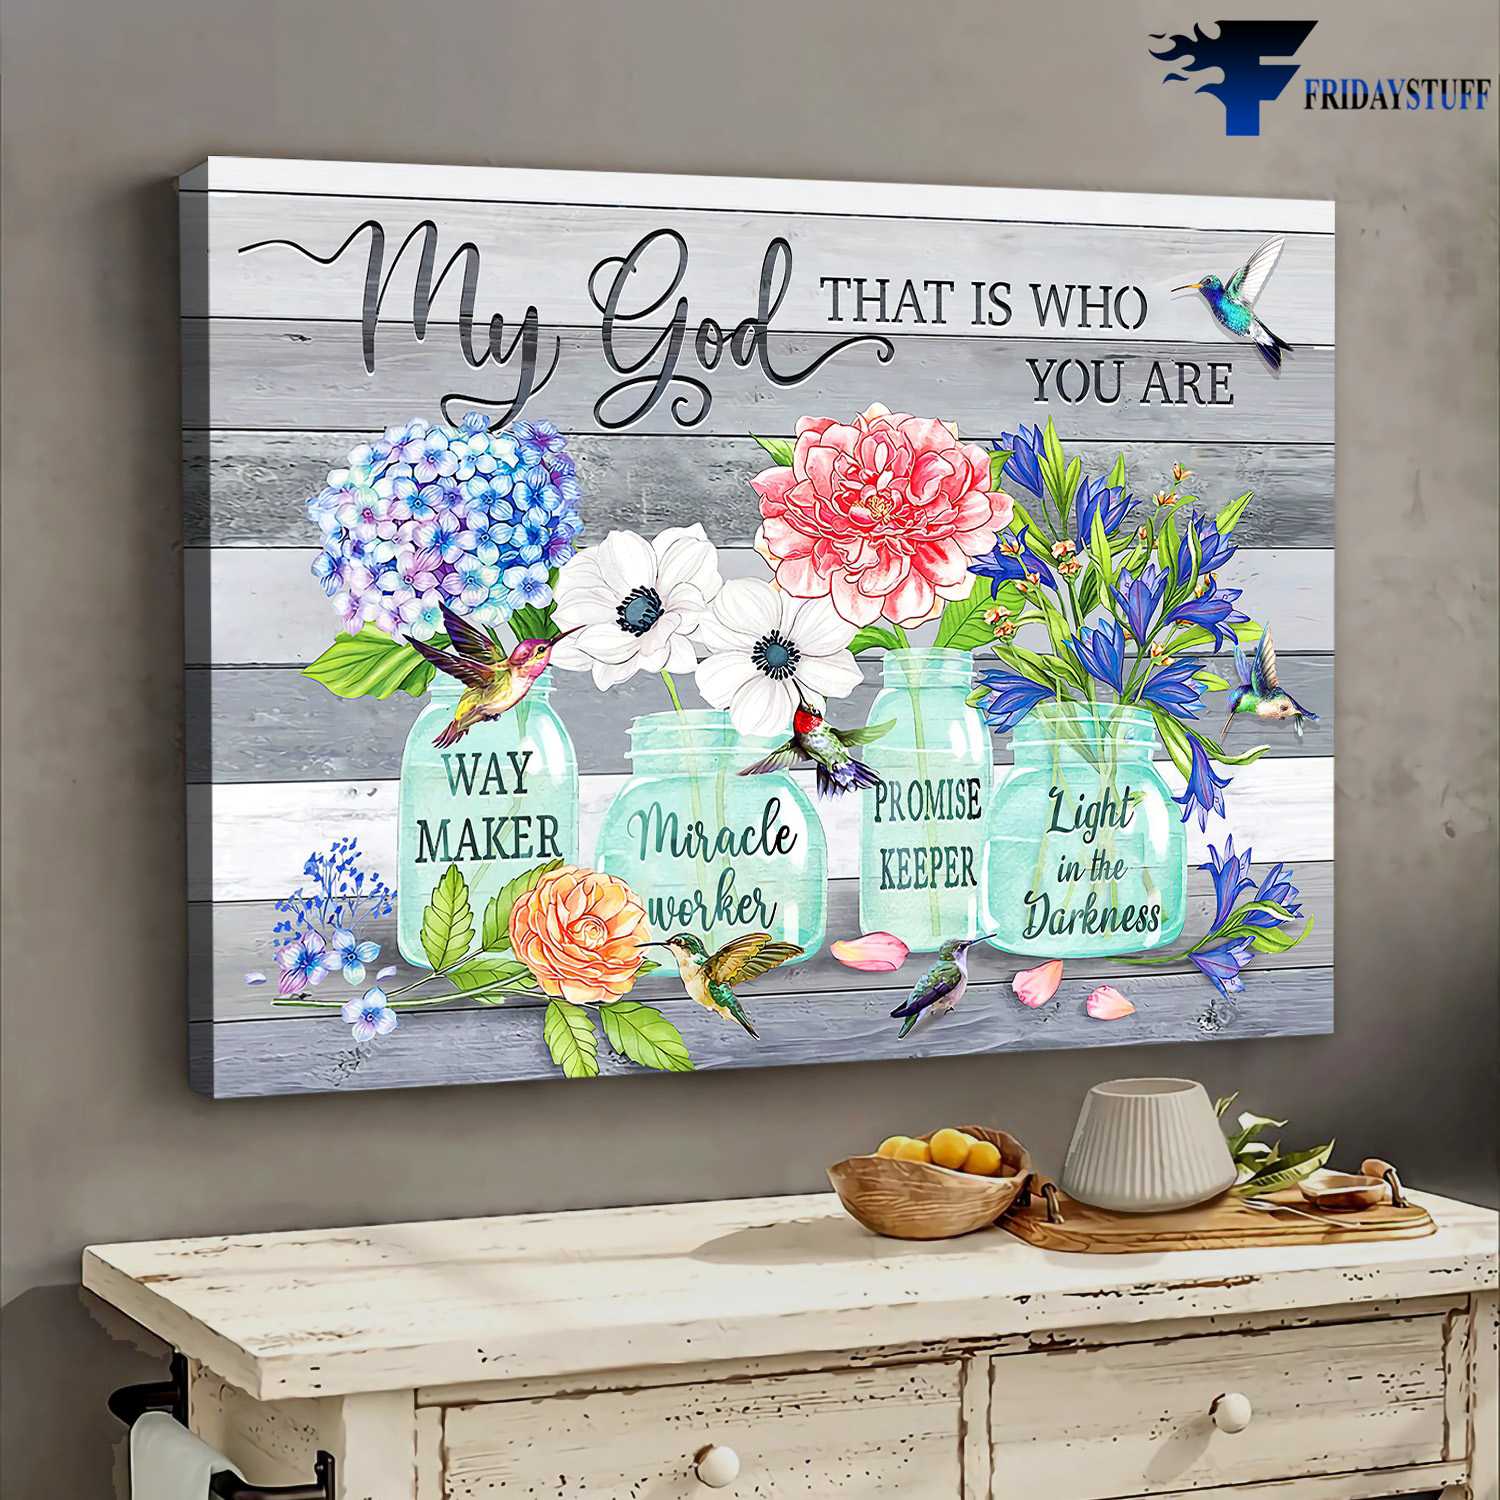 Hummingbird Flower, Wall Poster, My God, That Is Who You Are, Way Maker, Miracle Worker, Promise Keeper, Light In The Darkness